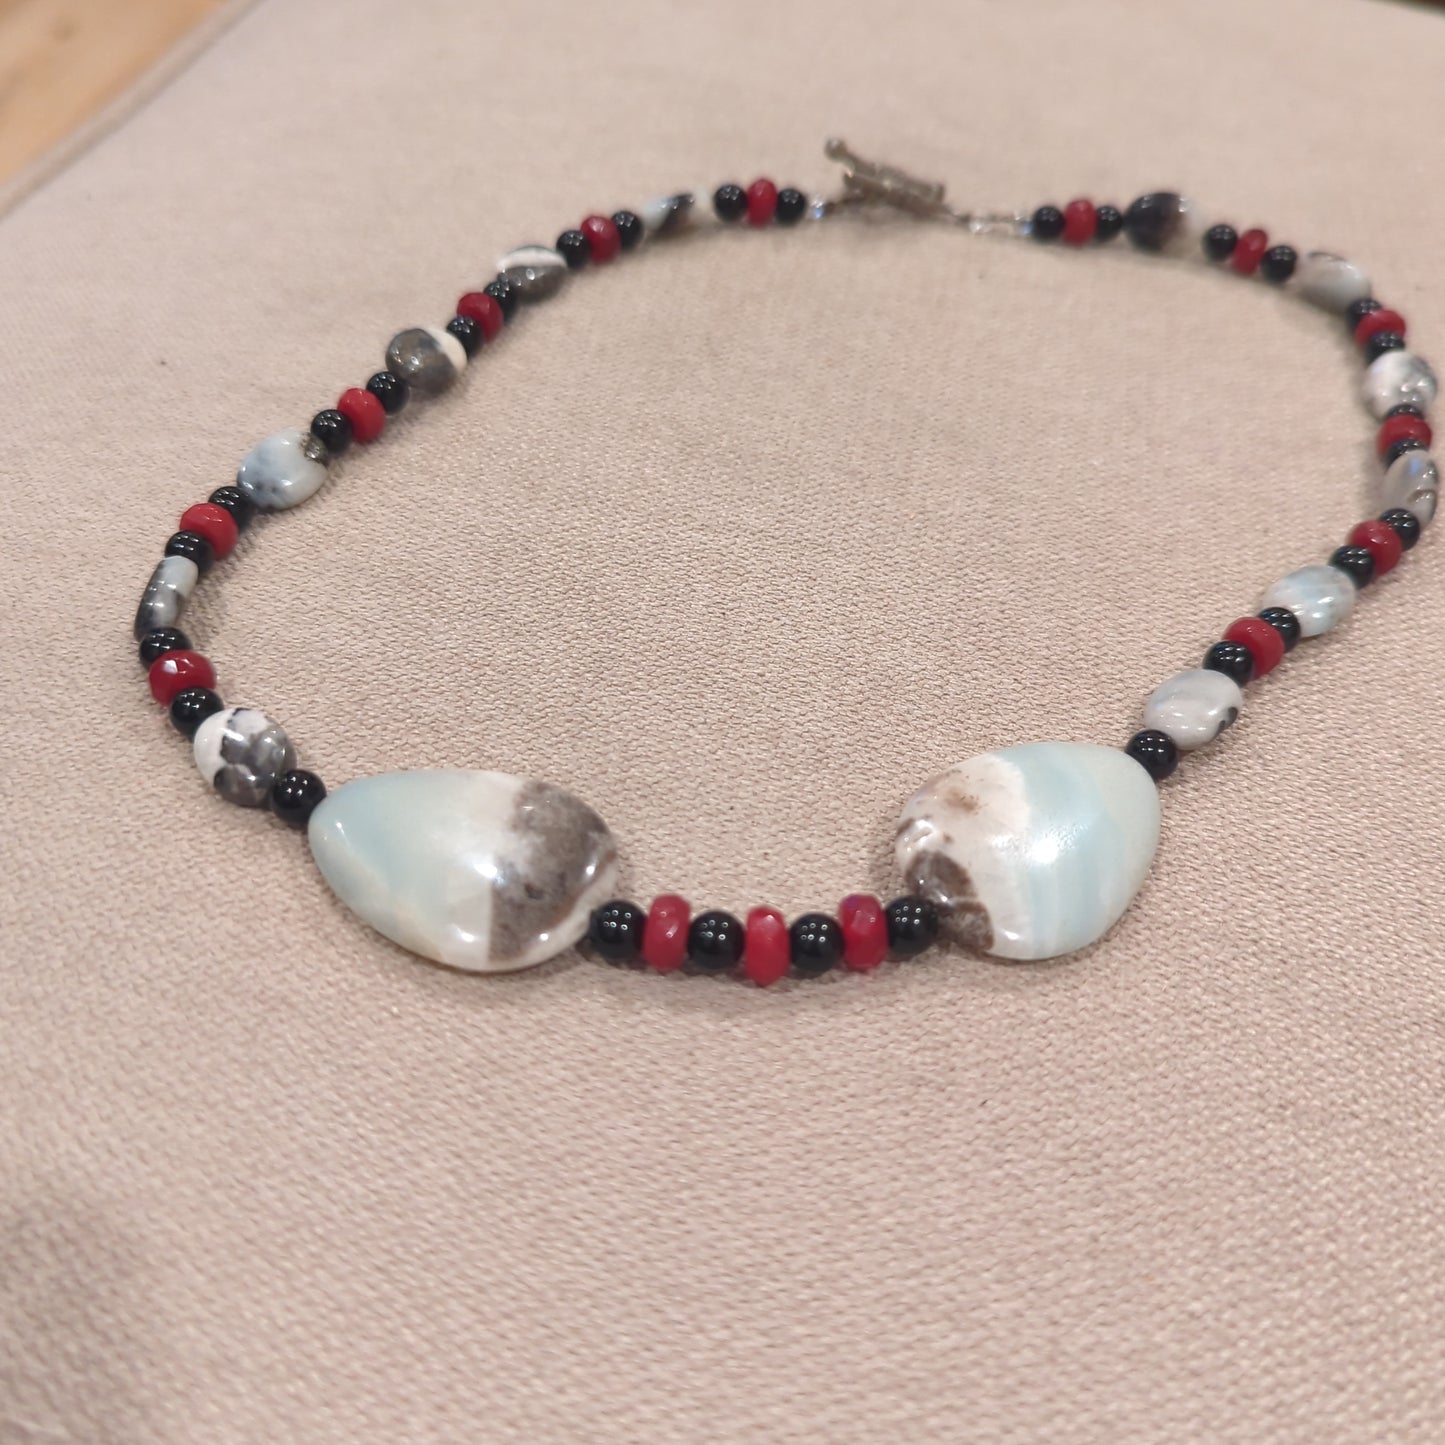 Vintage Caribbean Calcite Necklace with Red and Black Beads